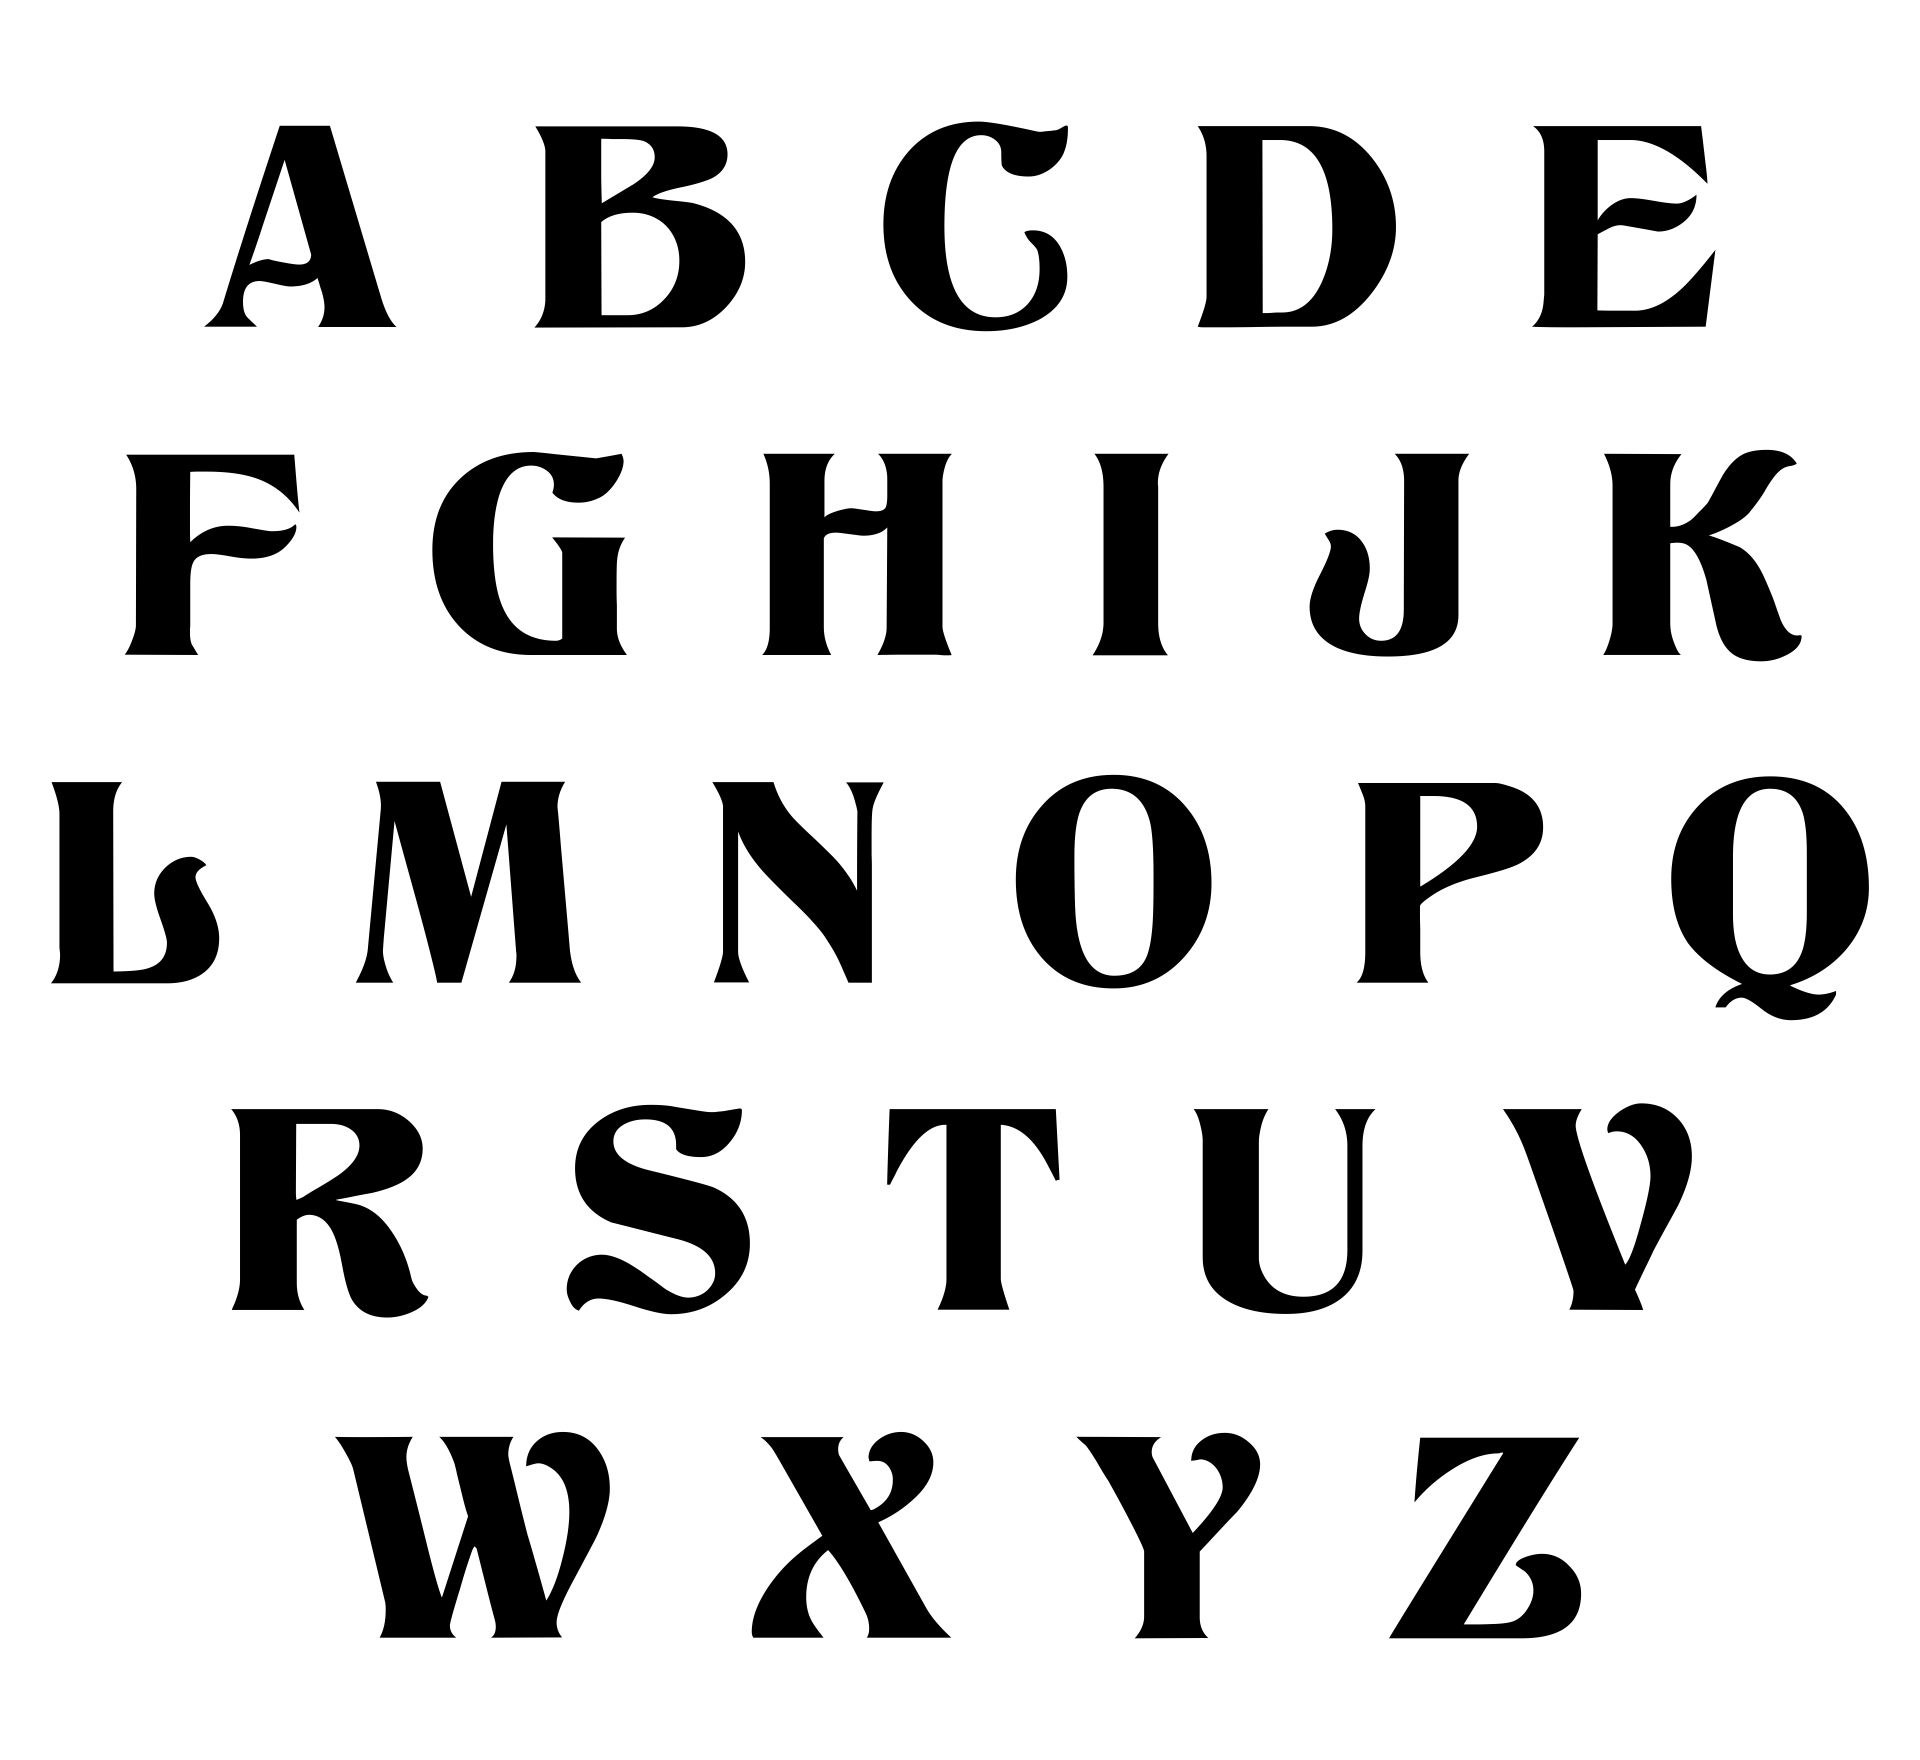 The Letter S In Different Fonts